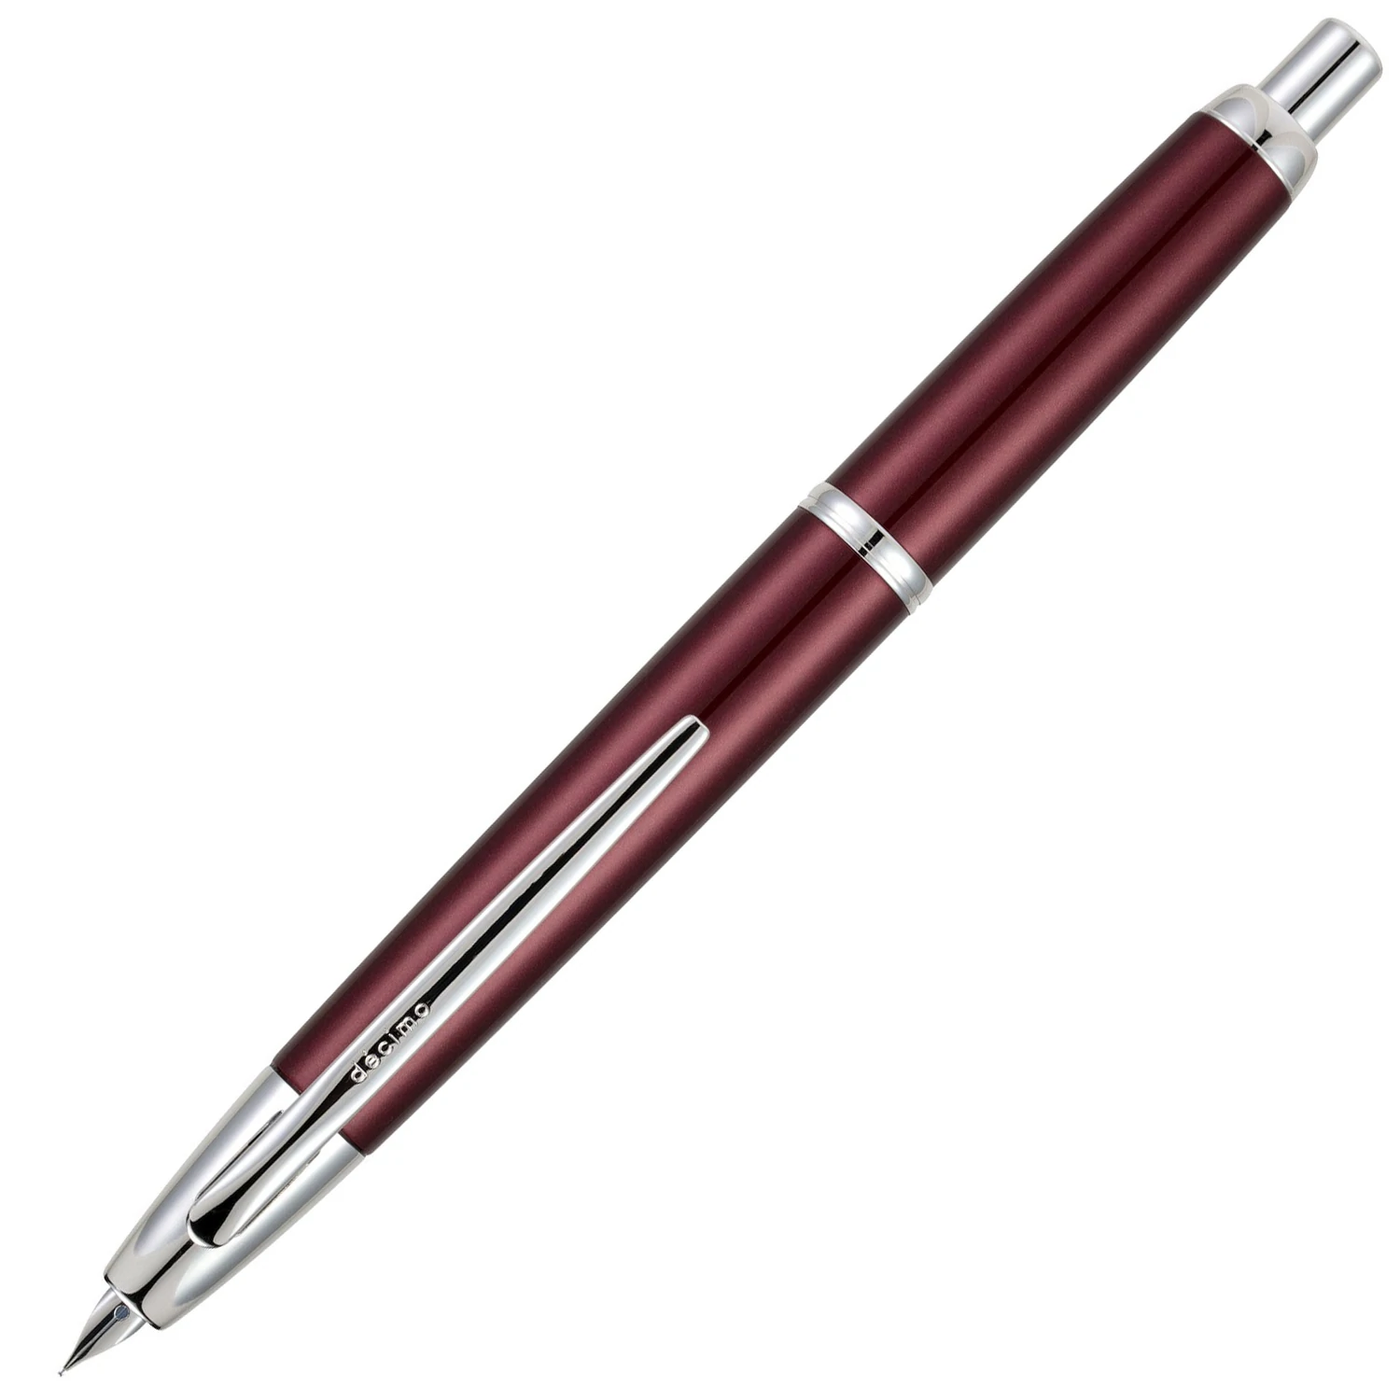 Pilot's name is synonymous with high quality and workmanship in the Pen market. They are also known as a luxury brand with great writing instruments. Made in Japan this company was founded in 1918. 